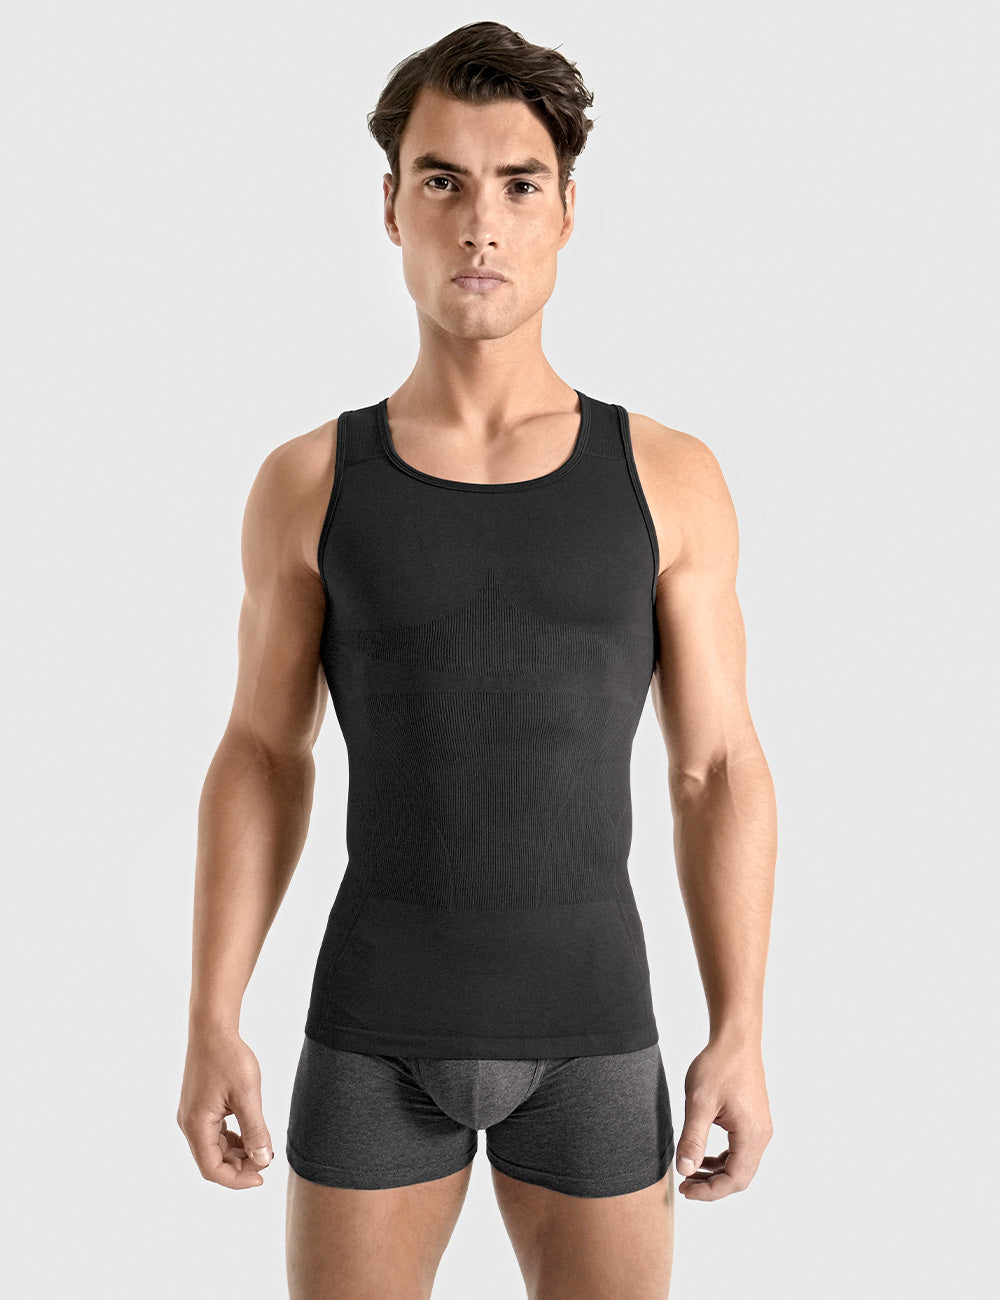 Technical Compression Jersey Dress - Ready-to-Wear